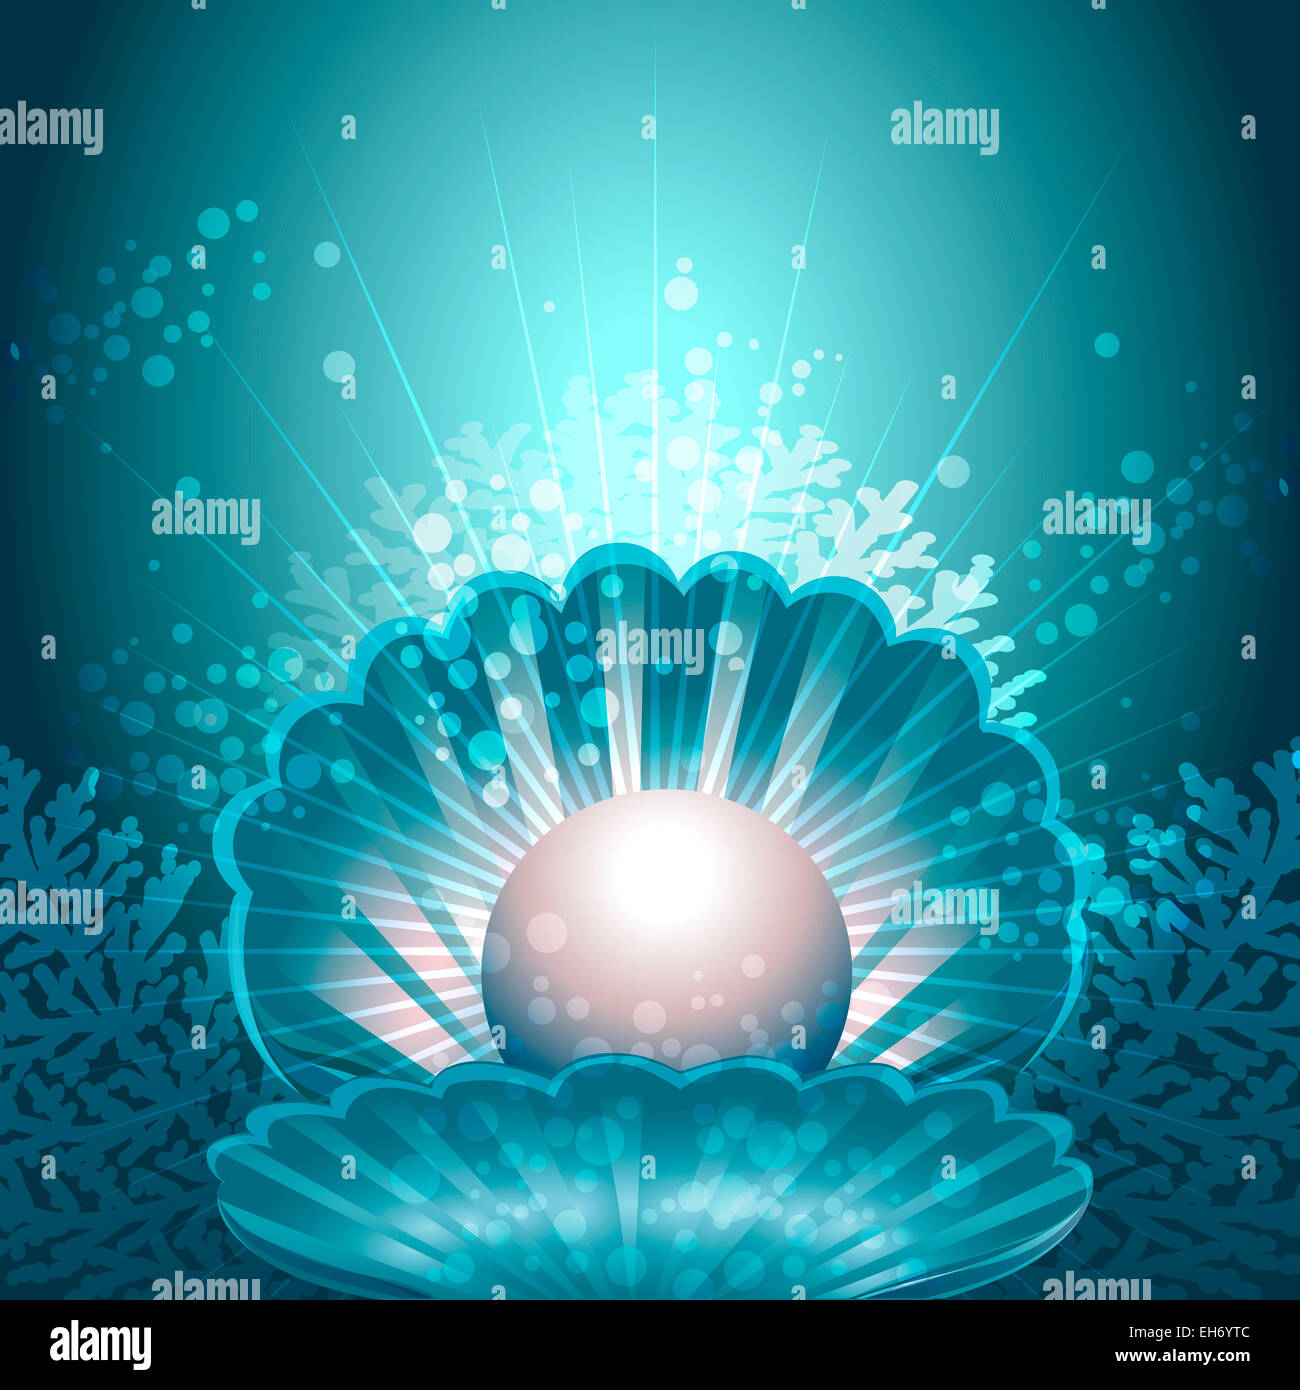 Illustration of open shell with pearl inside against sea background with corals drawn in fantasy style Stock Photo